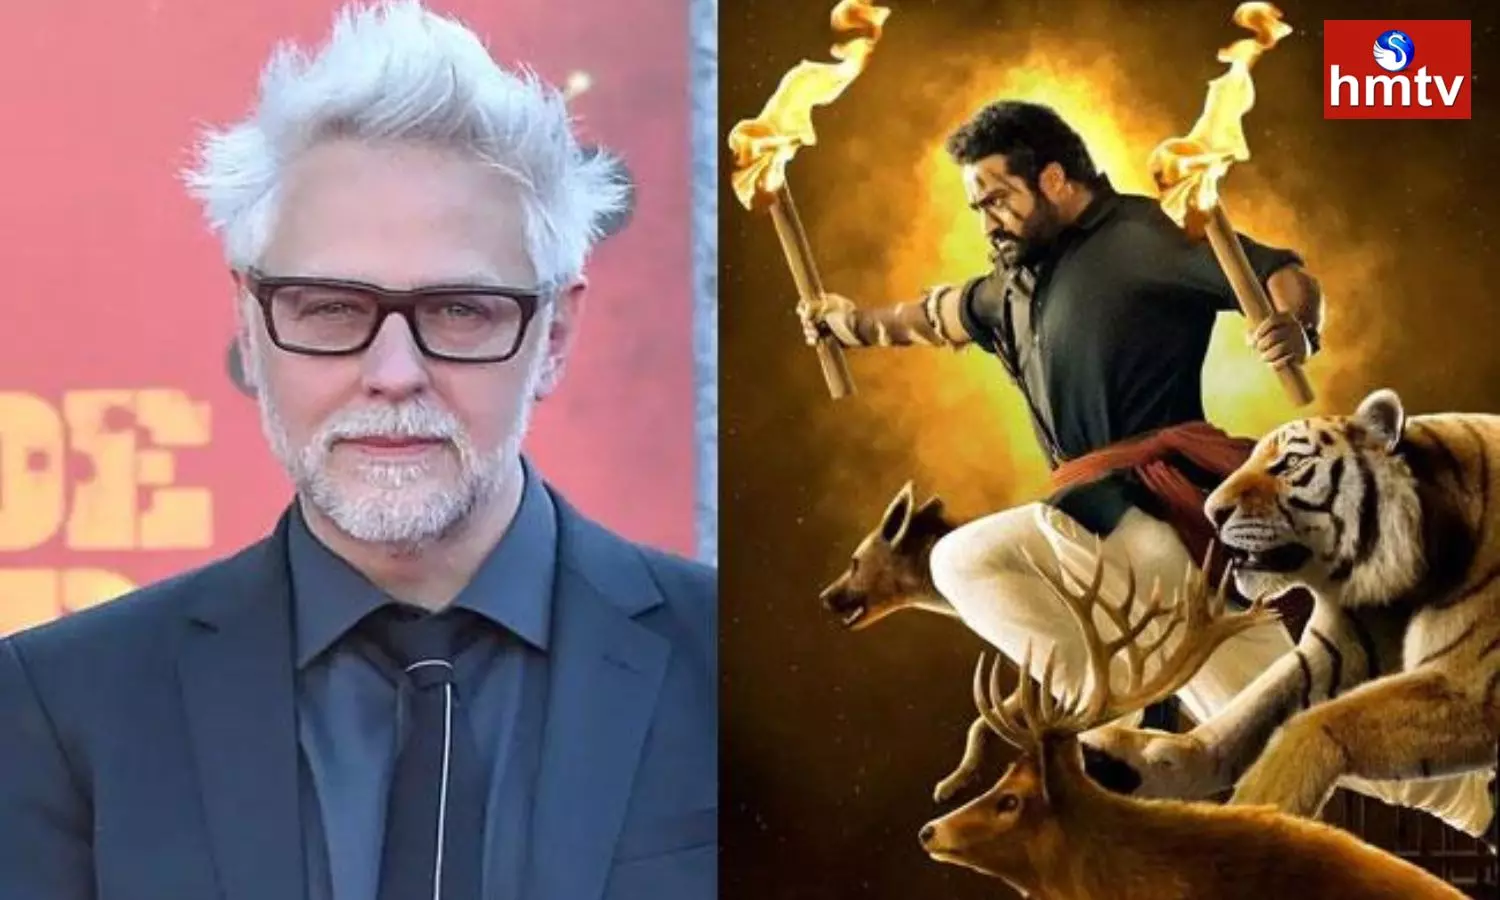 Hollywood Director James Gunn Wants to Work With Jr NTR